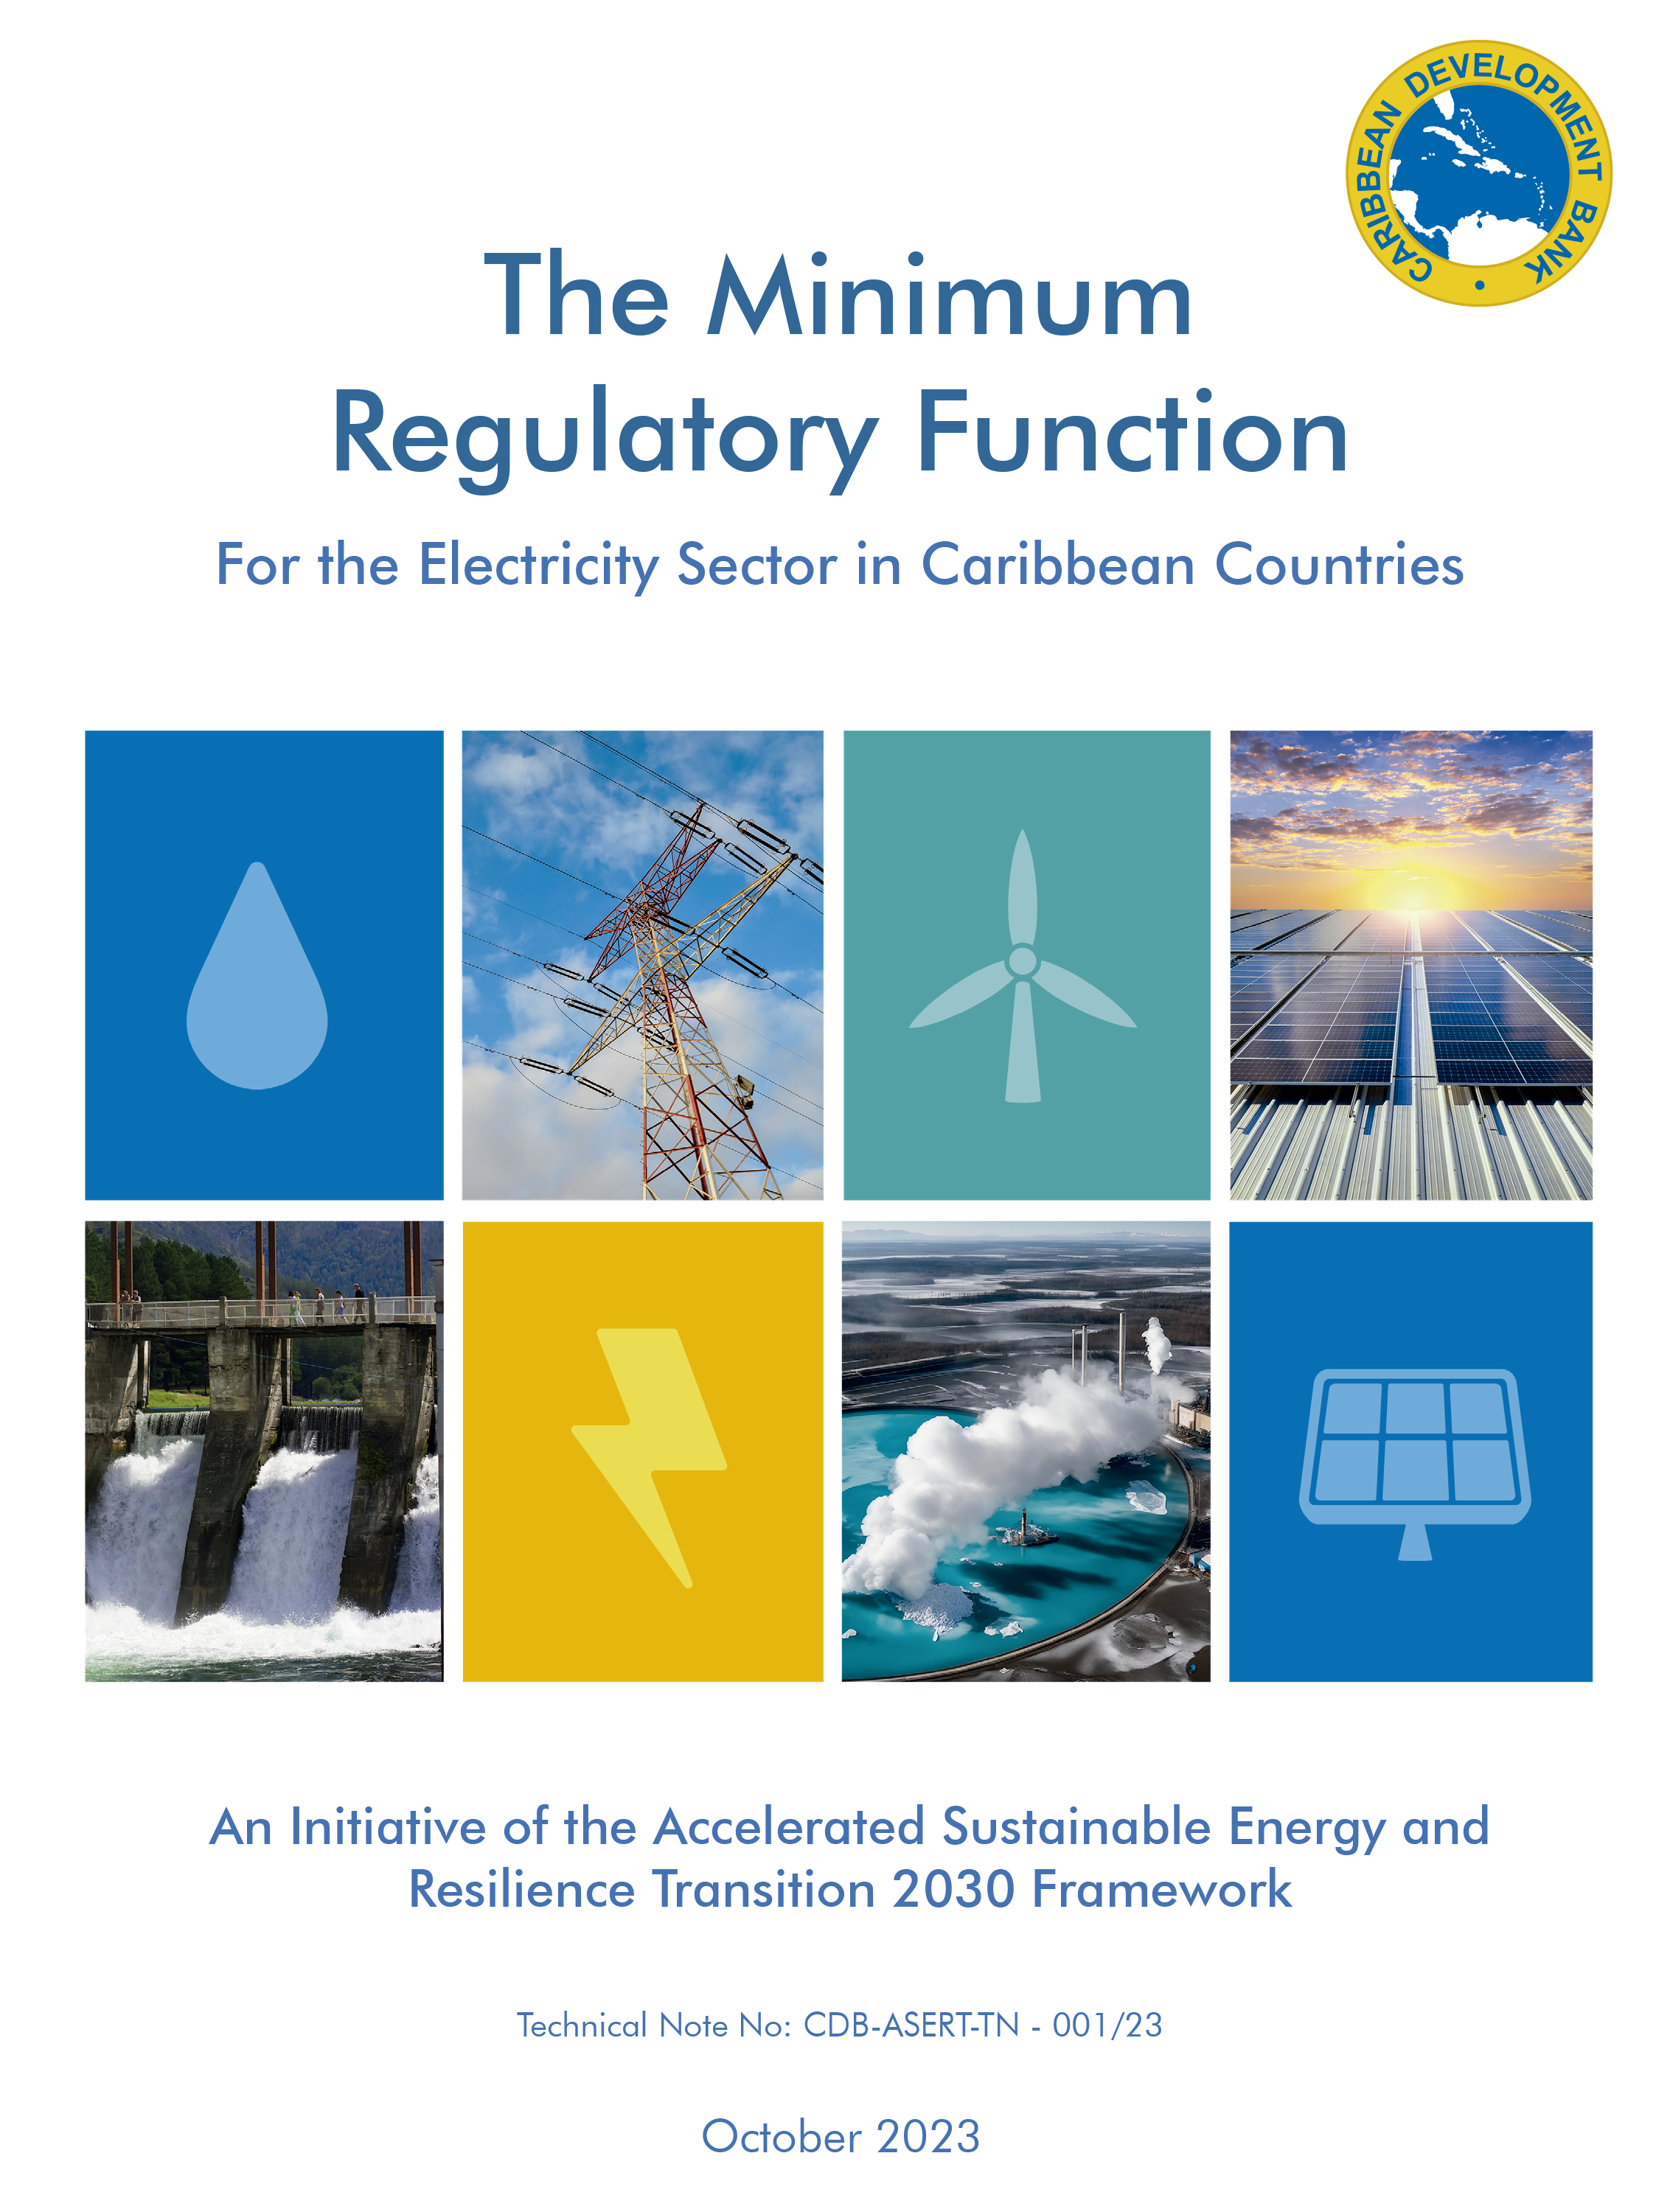 The cover of the MRF report shows pictures of the CDB logo and airplane, water dam, solar panels and wind wane 